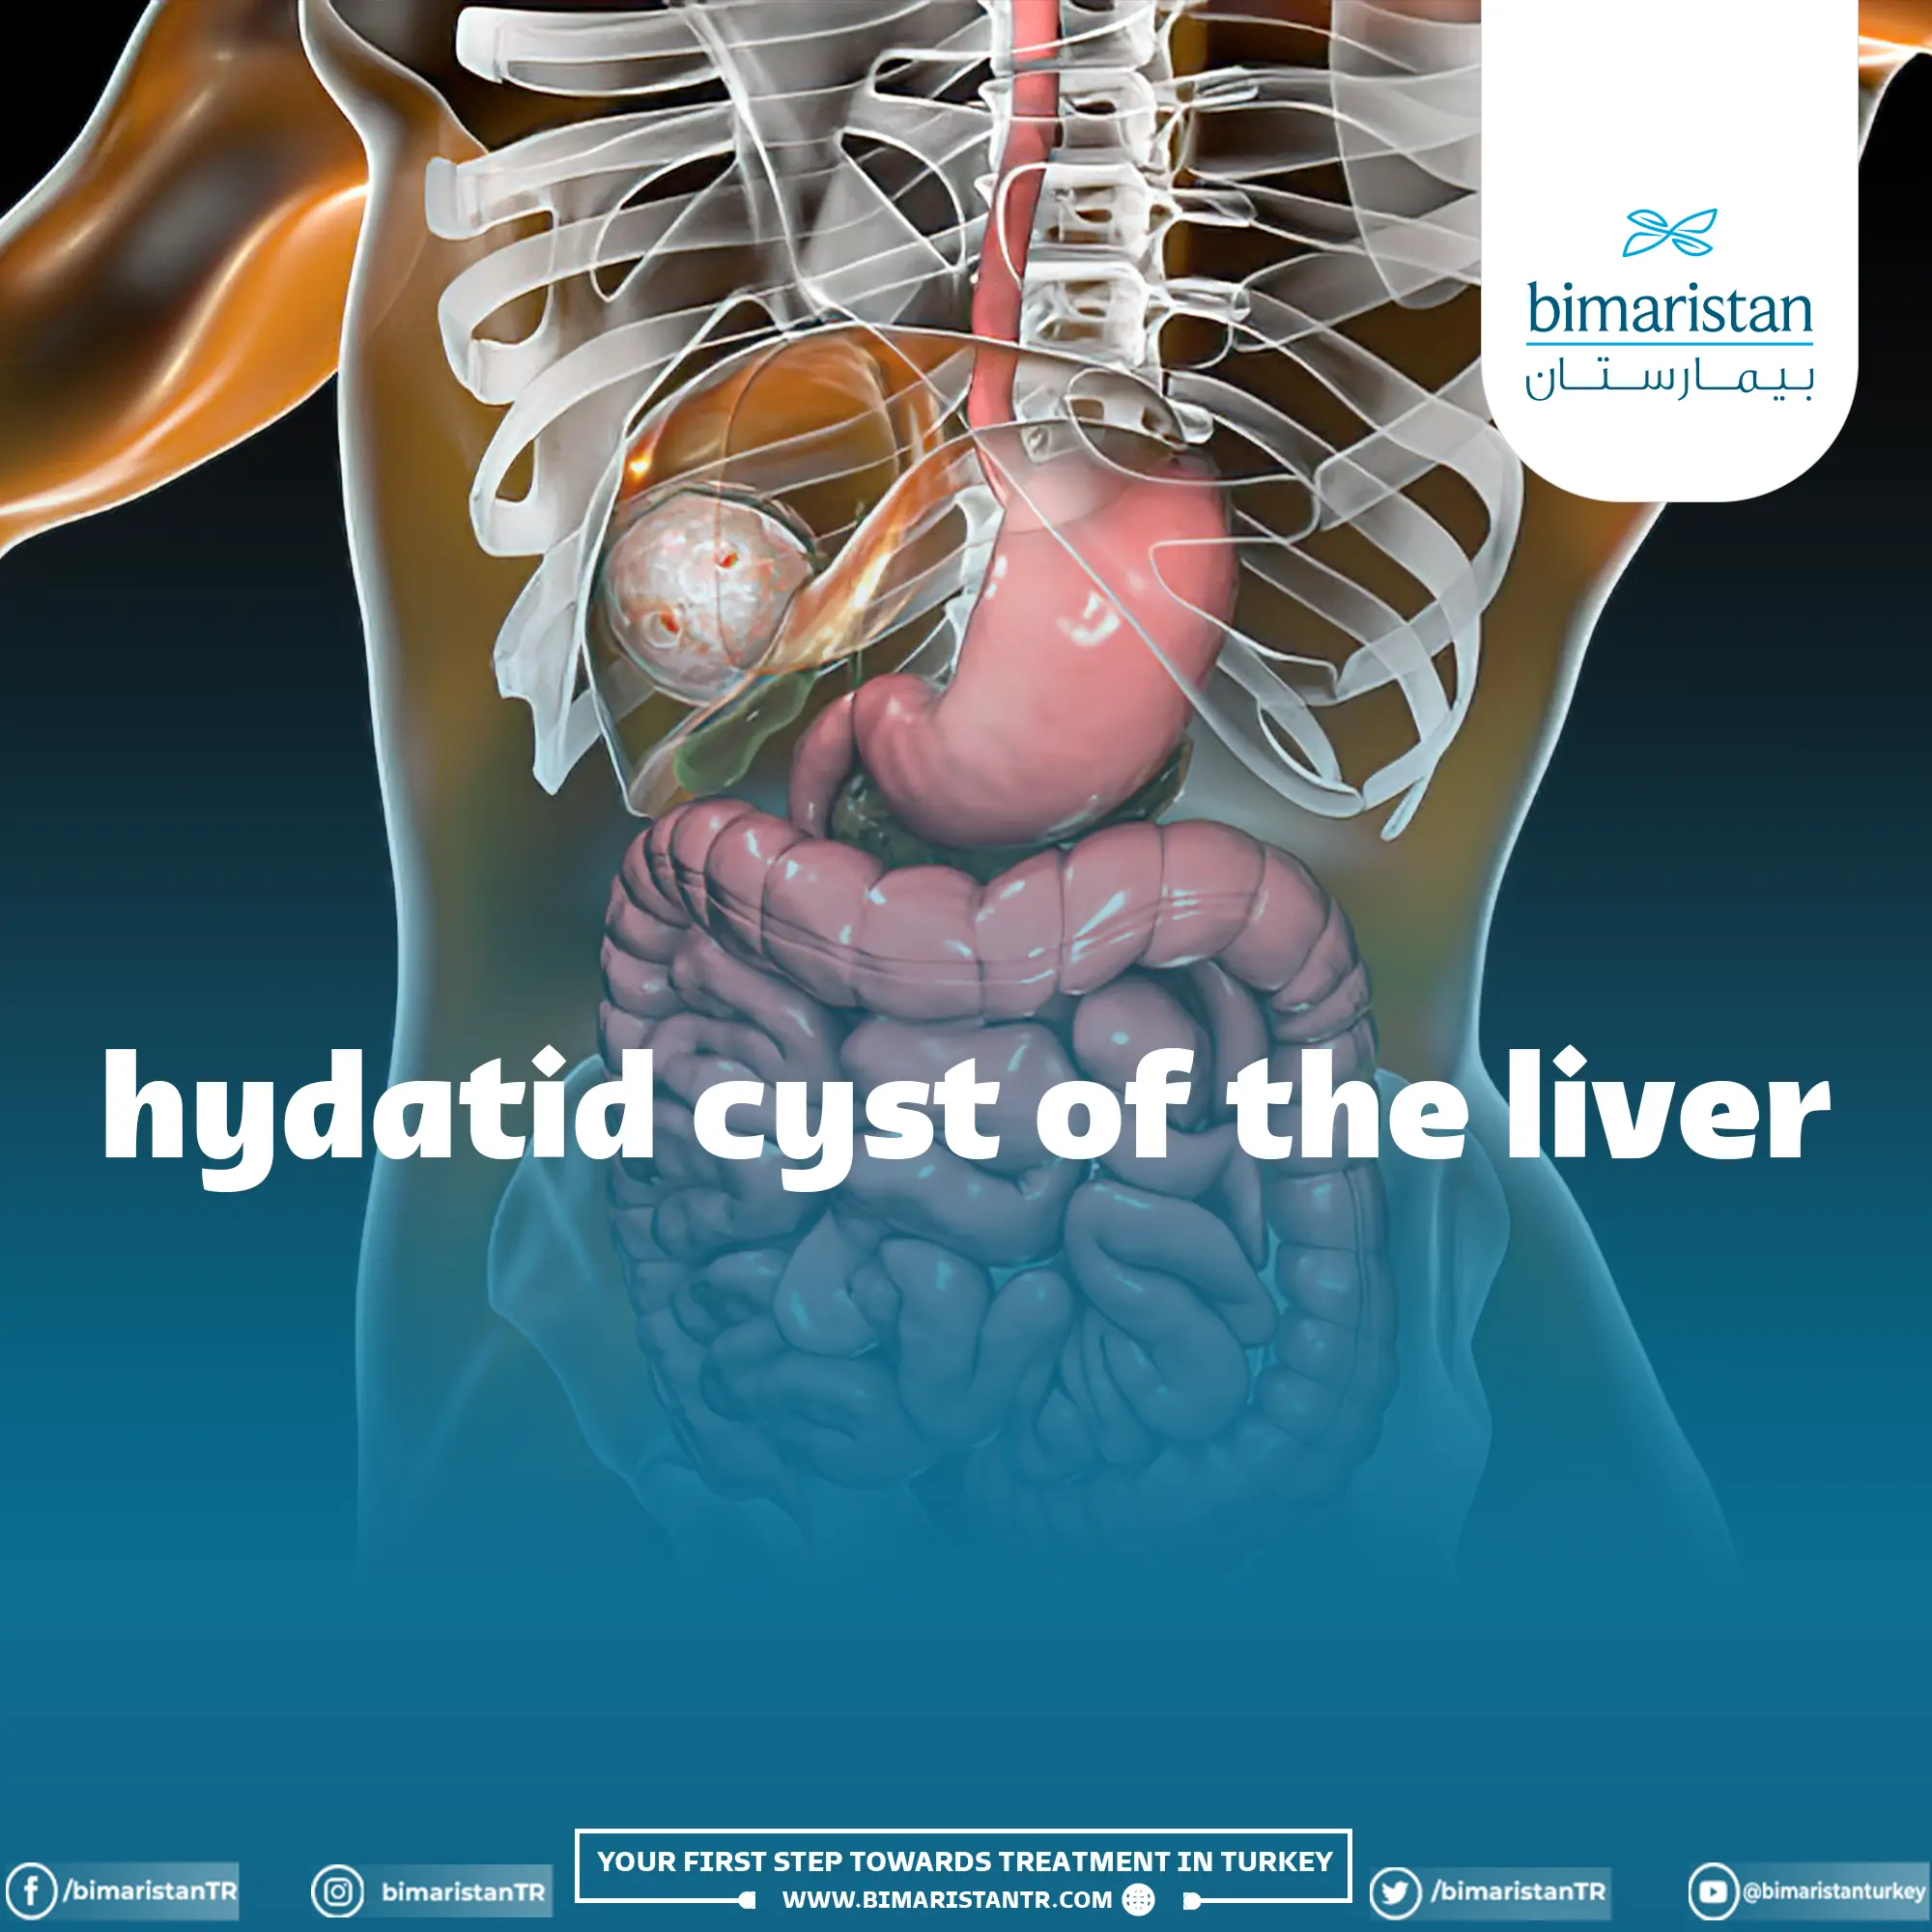 Cover image for the Hydatid Cyst of the Liver article